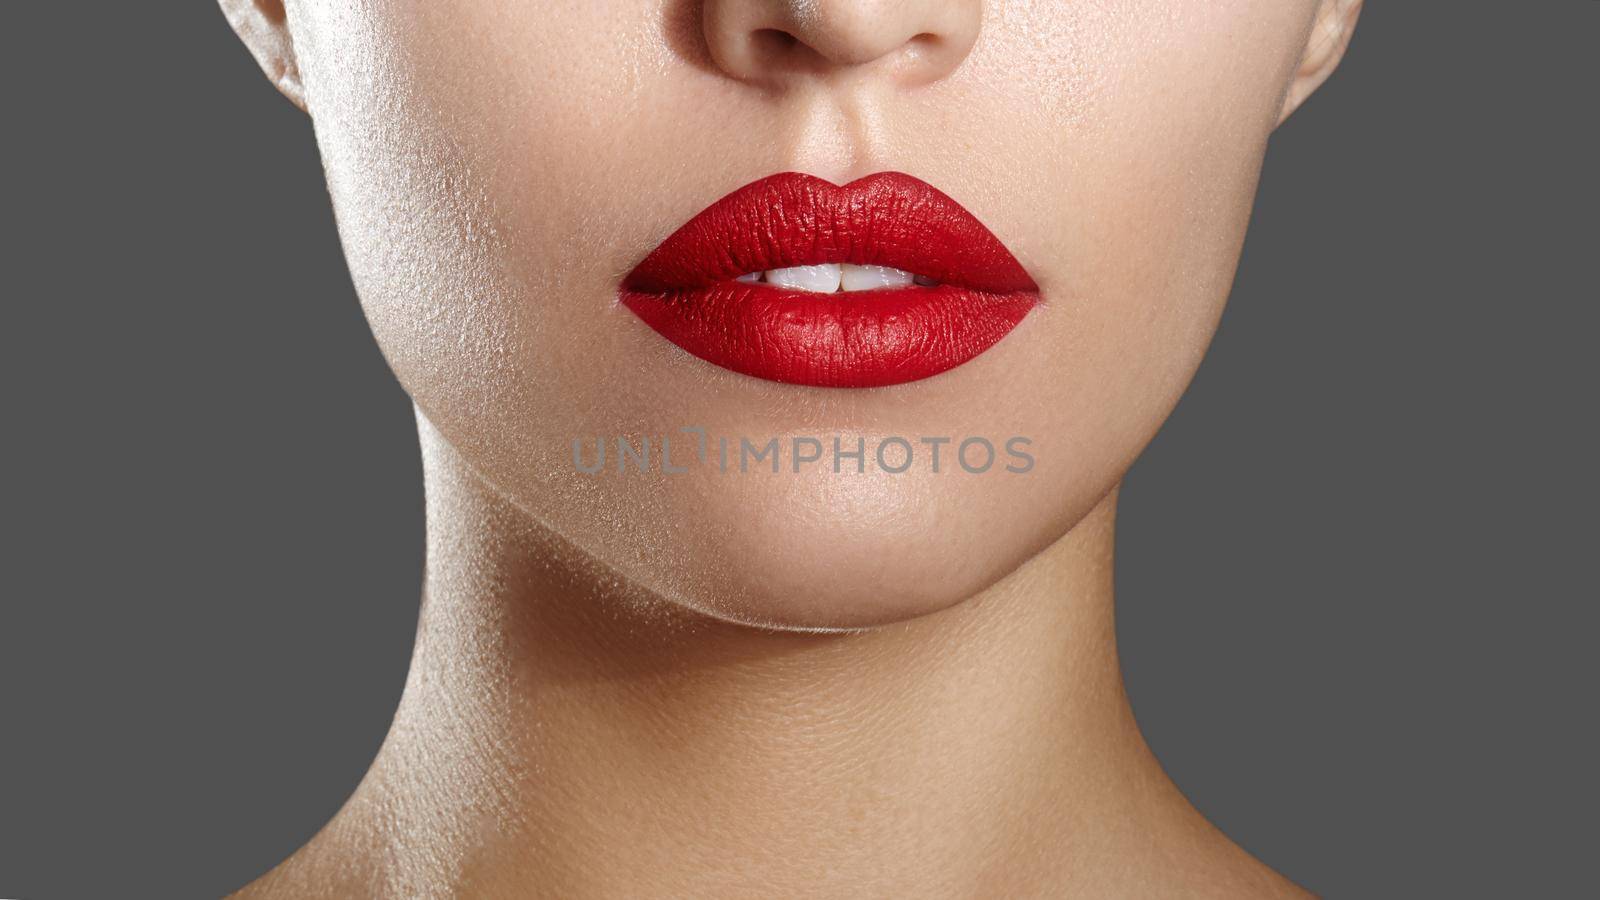 Cosmetics, Makeup and Trends. Bright Lip Gloss and Lipstick on Lips. Closeup of Beautiful Female Mouth with Red Lip Makeup. Beautiful Part of Female Face. Perfect Clean Skin. Horizontal